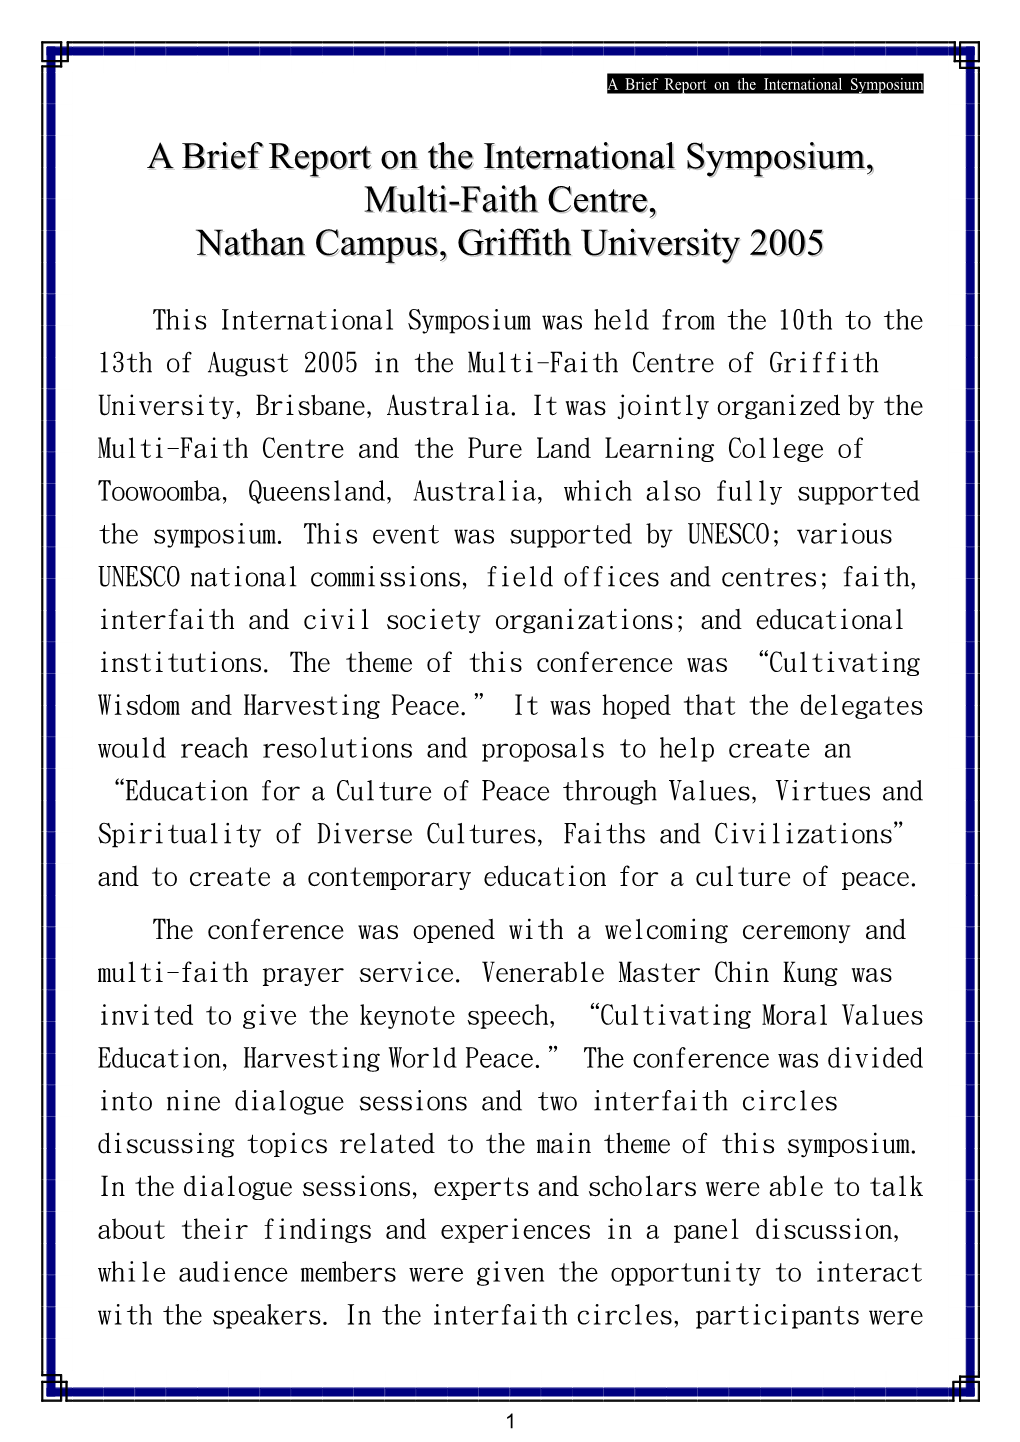 A Brief Report on the International Symposium, Multi-Faith Centre, Nathan Campus, Griffith University 2005